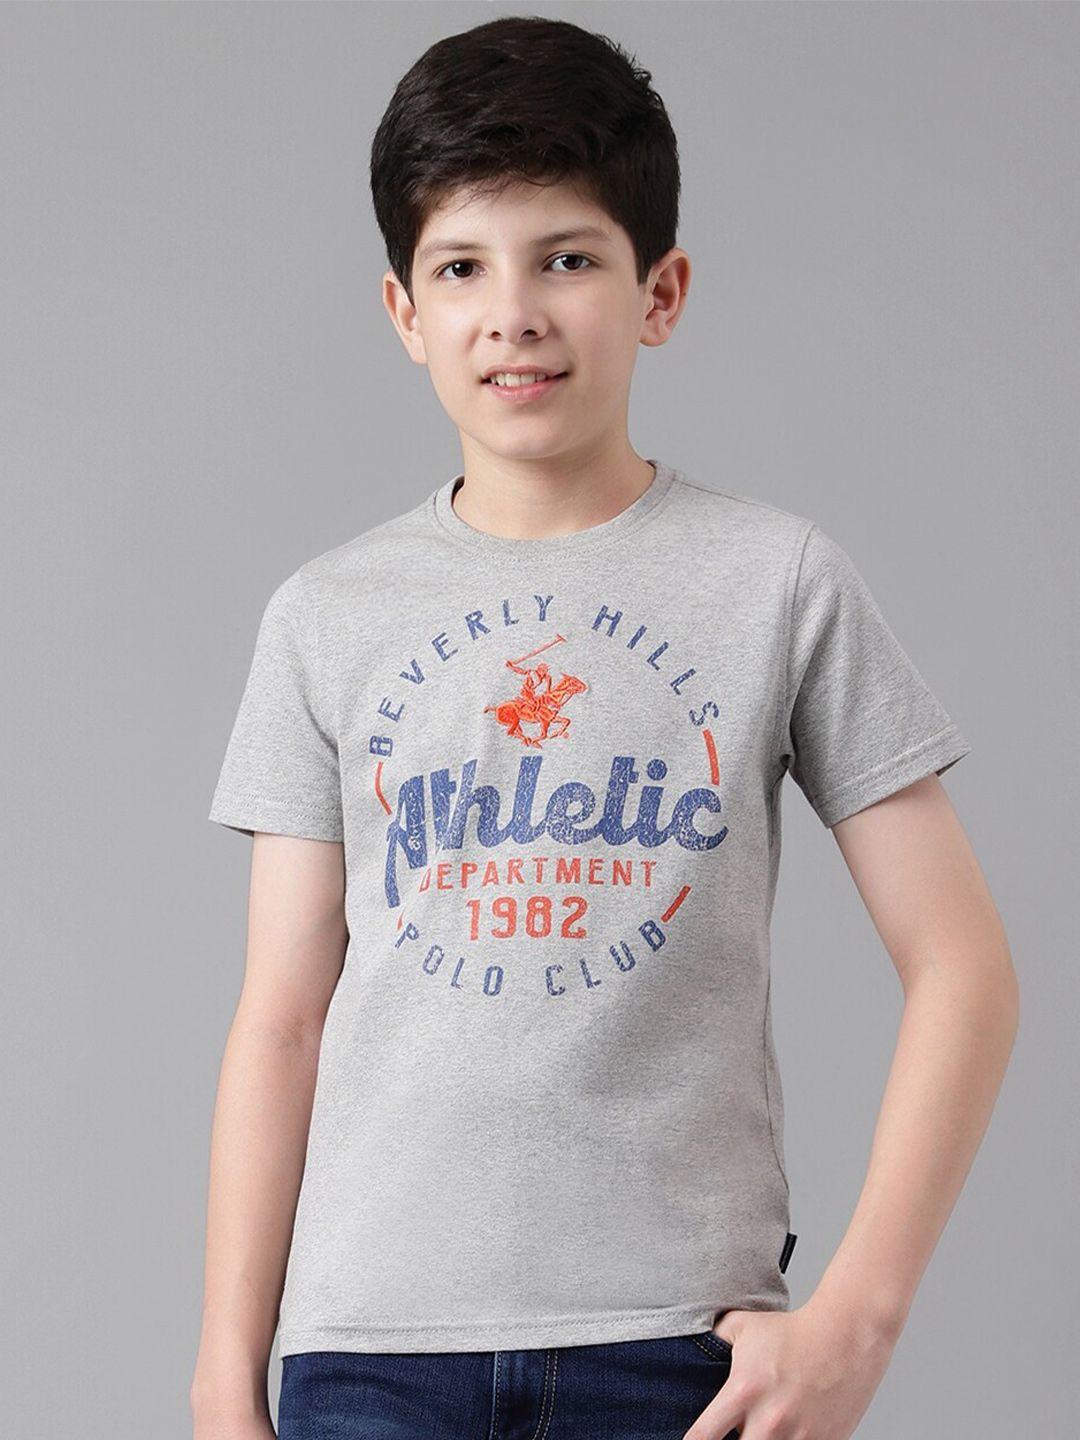 beverly hills polo club boys typography printed pure cotton t-shirt